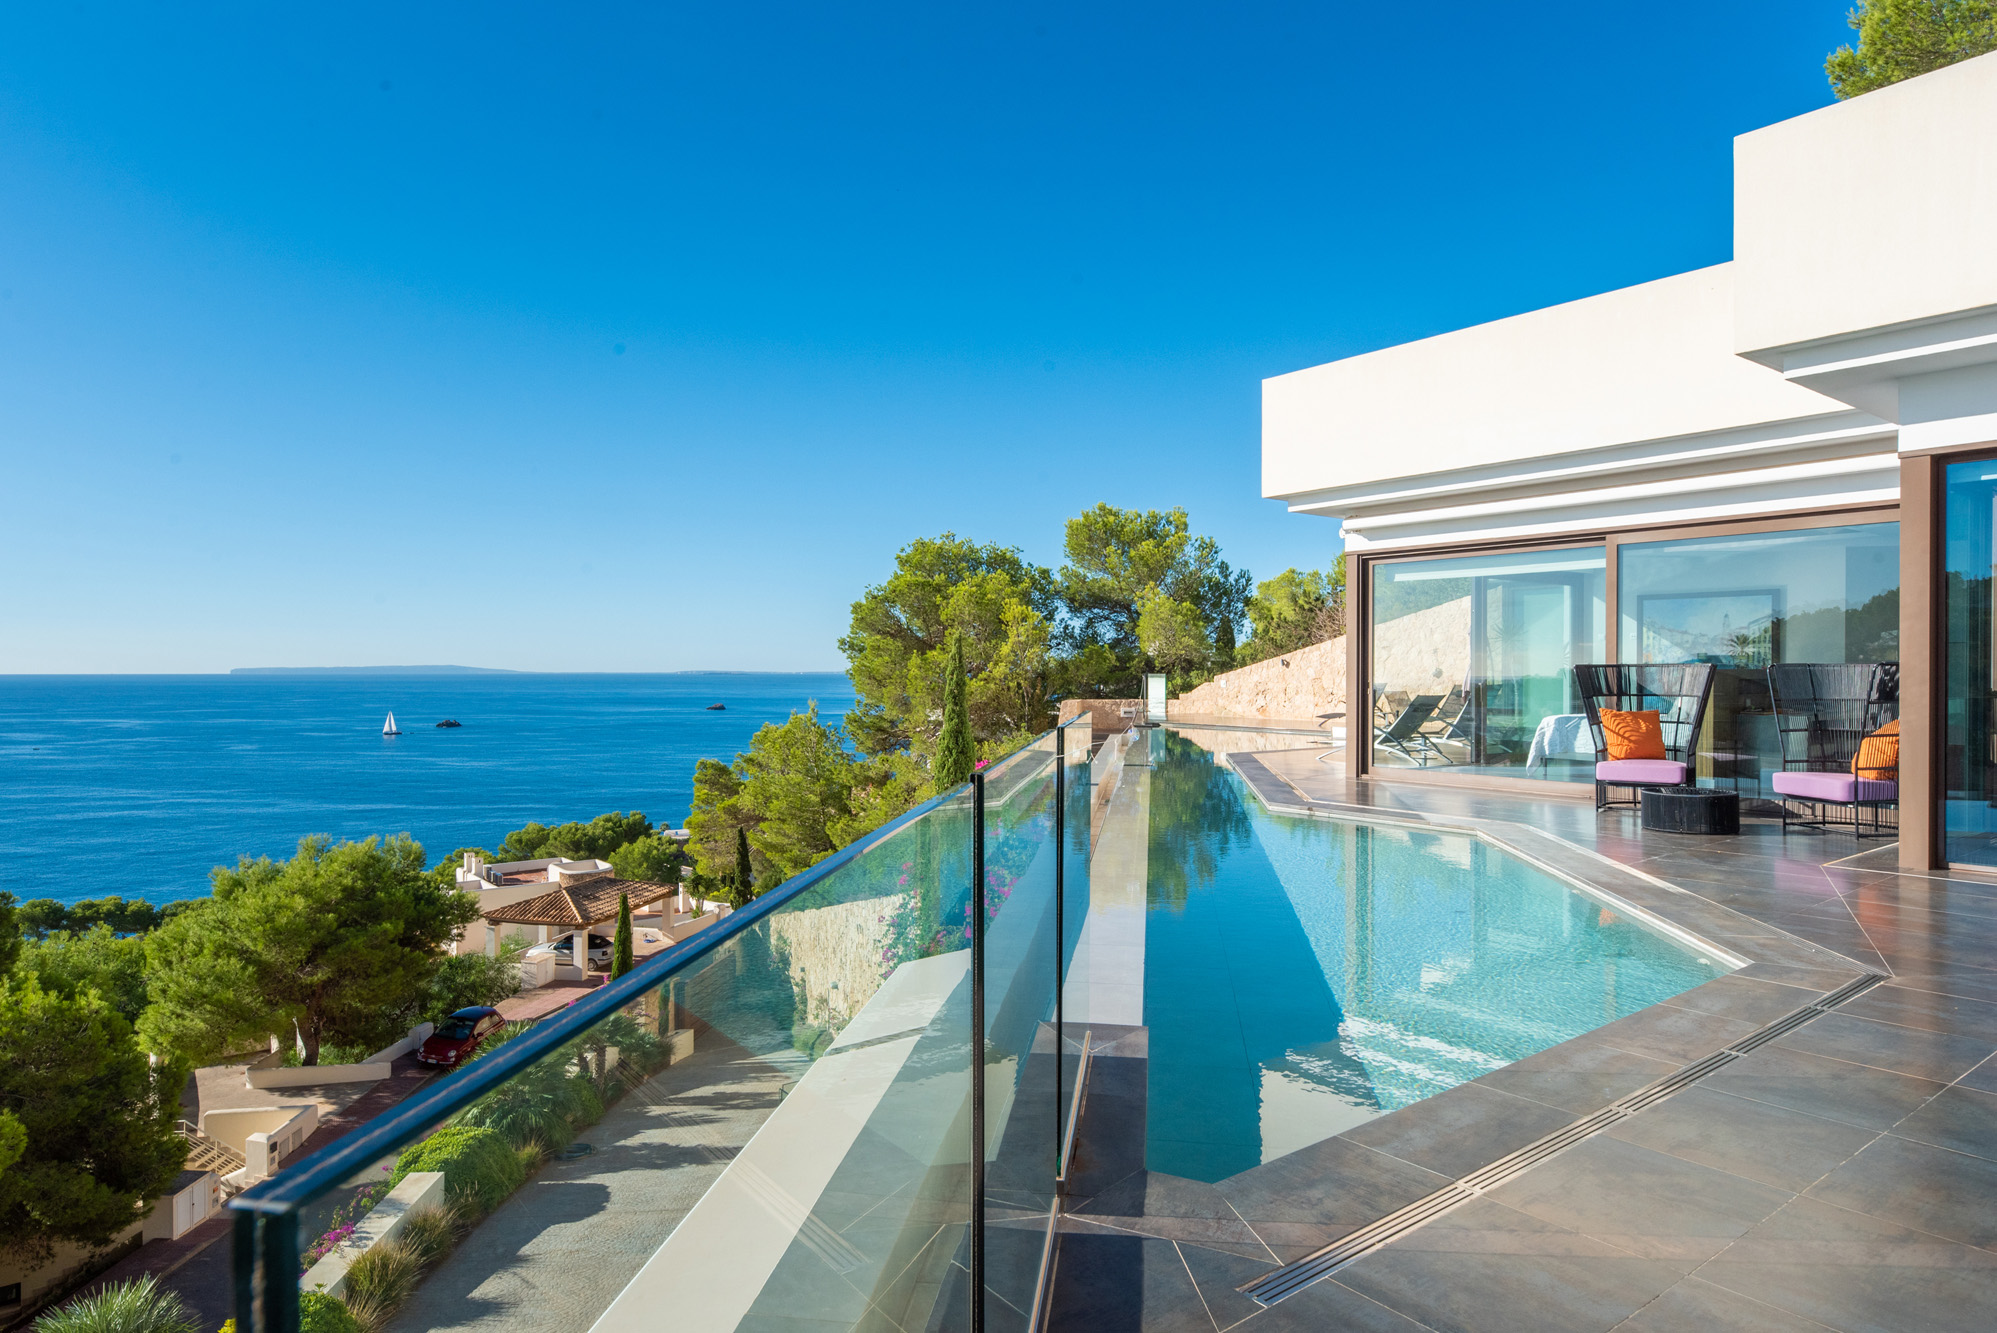 Infinity pool and sea views from a luxury villa for sale in Ibiza